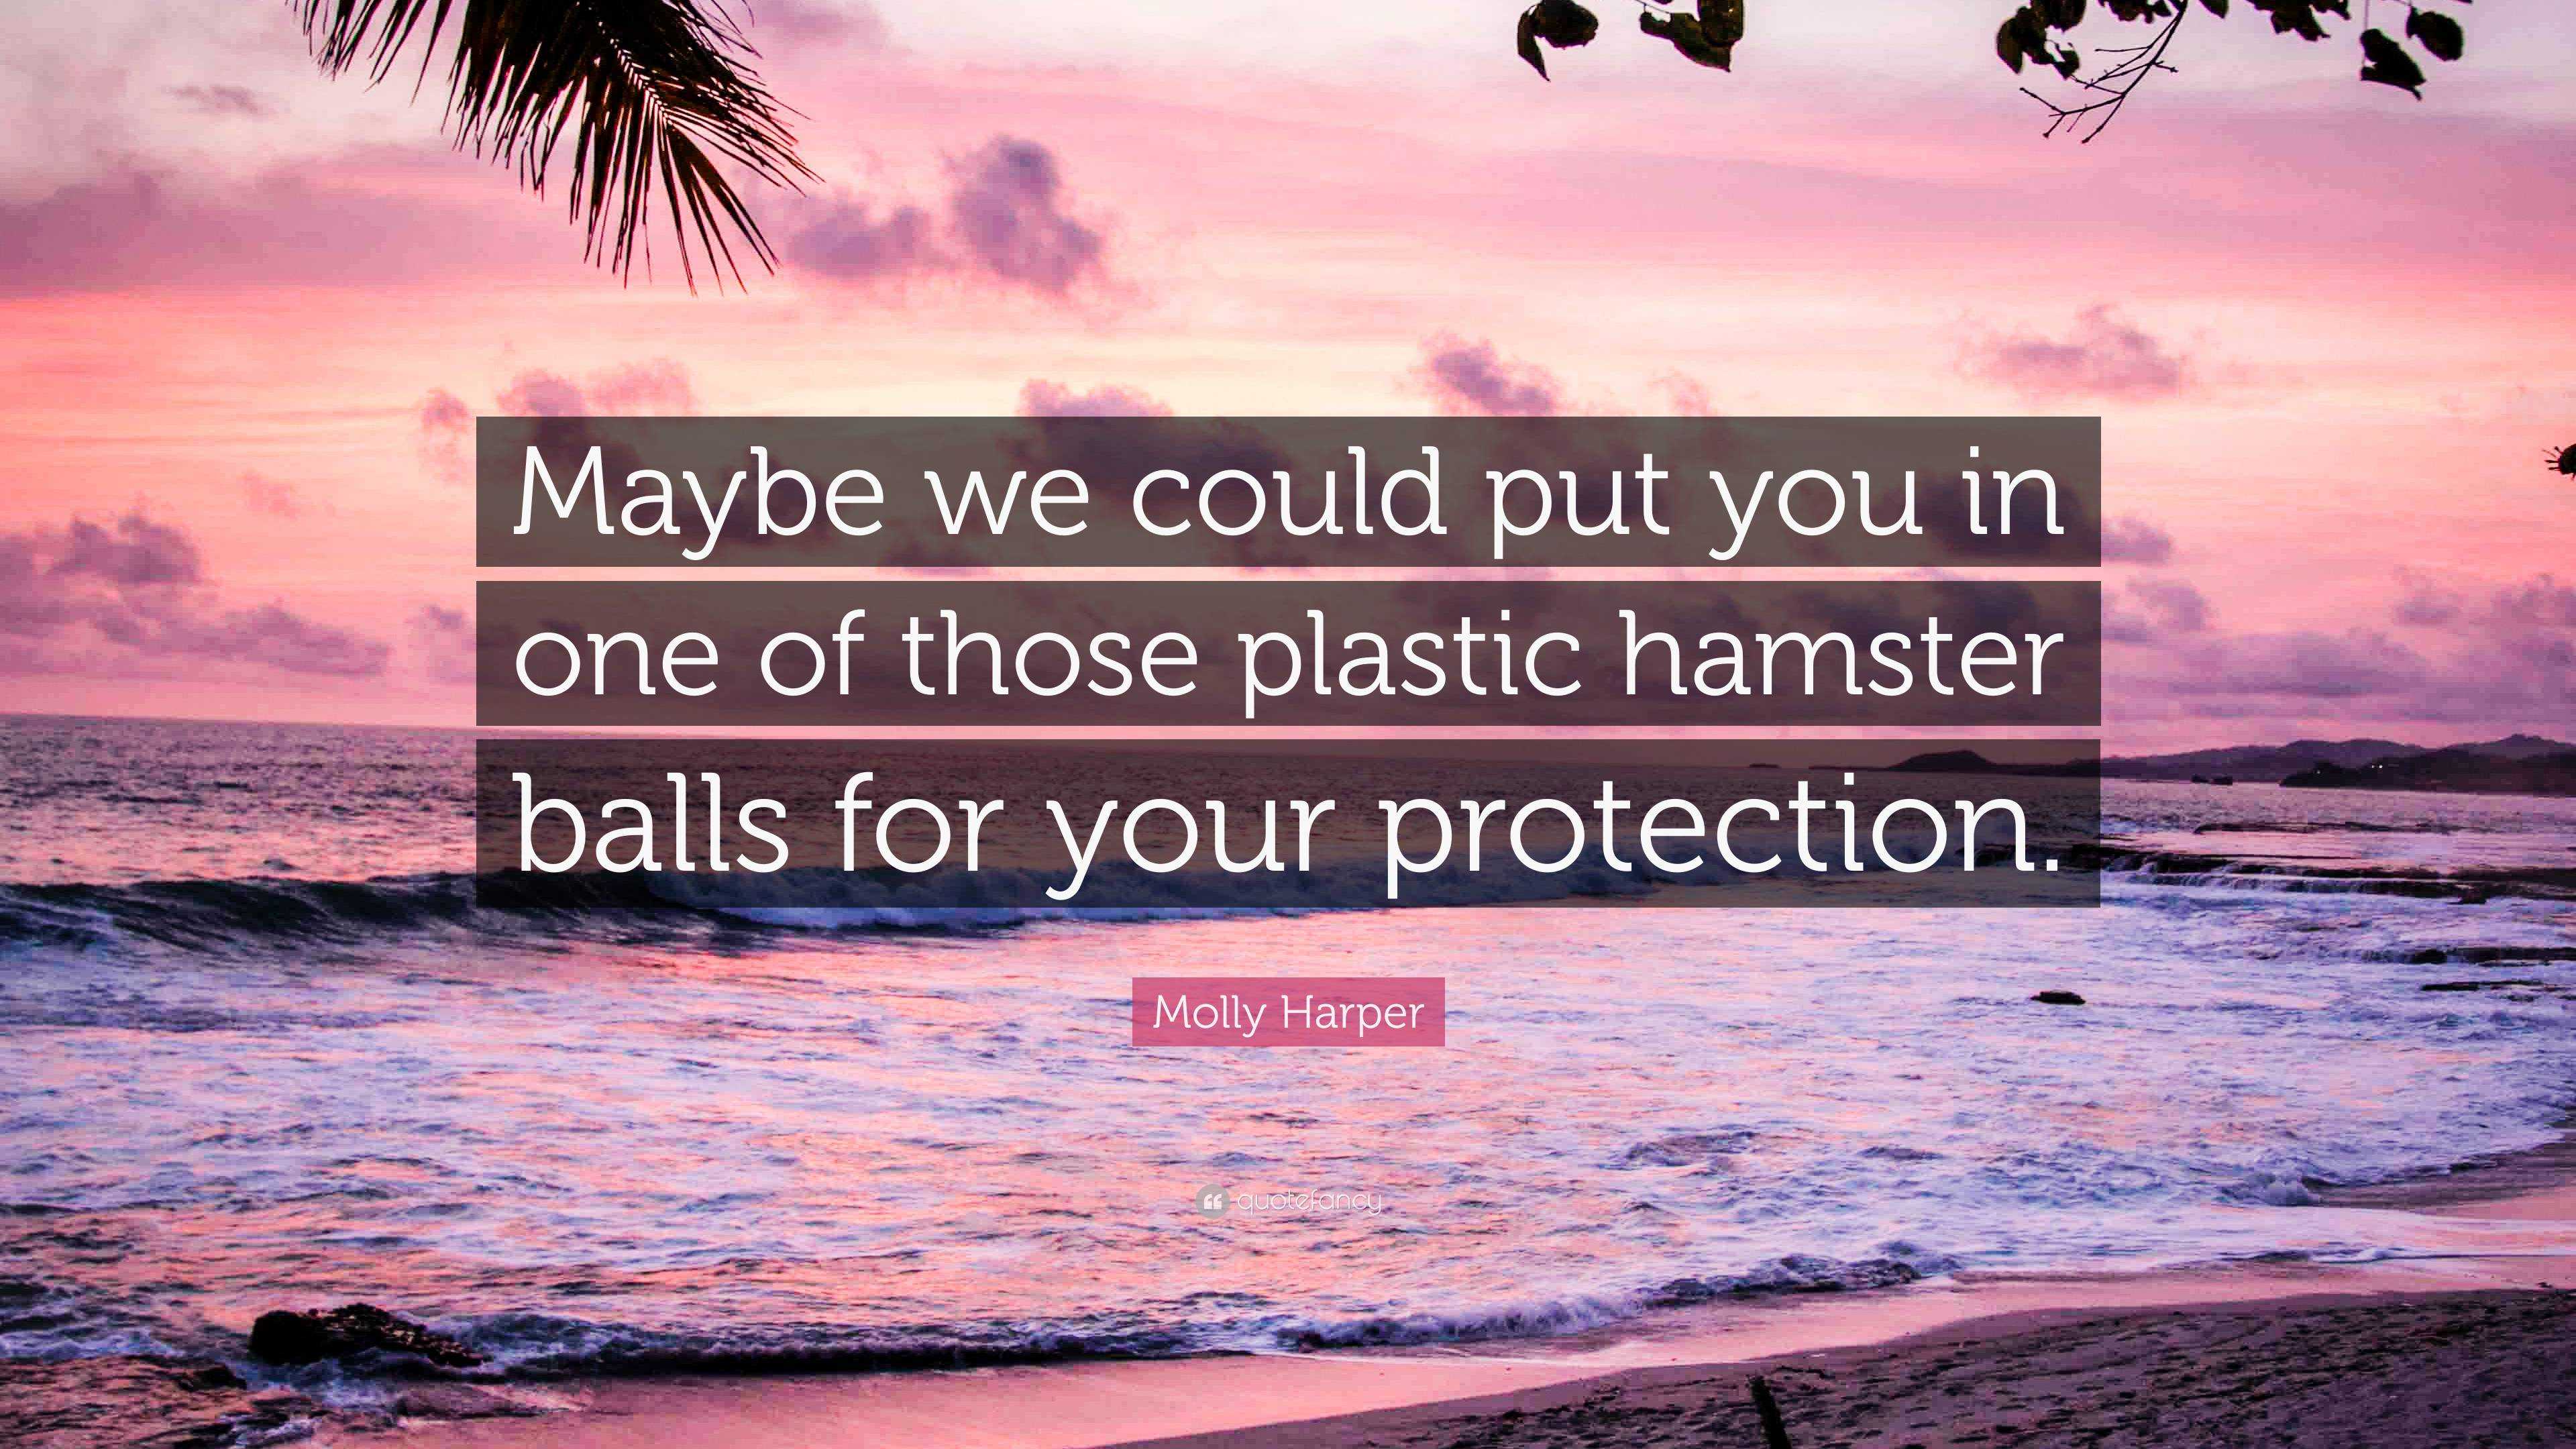 Molly Harper Quote: “Maybe we could put you in one of those plastic hamster  balls for